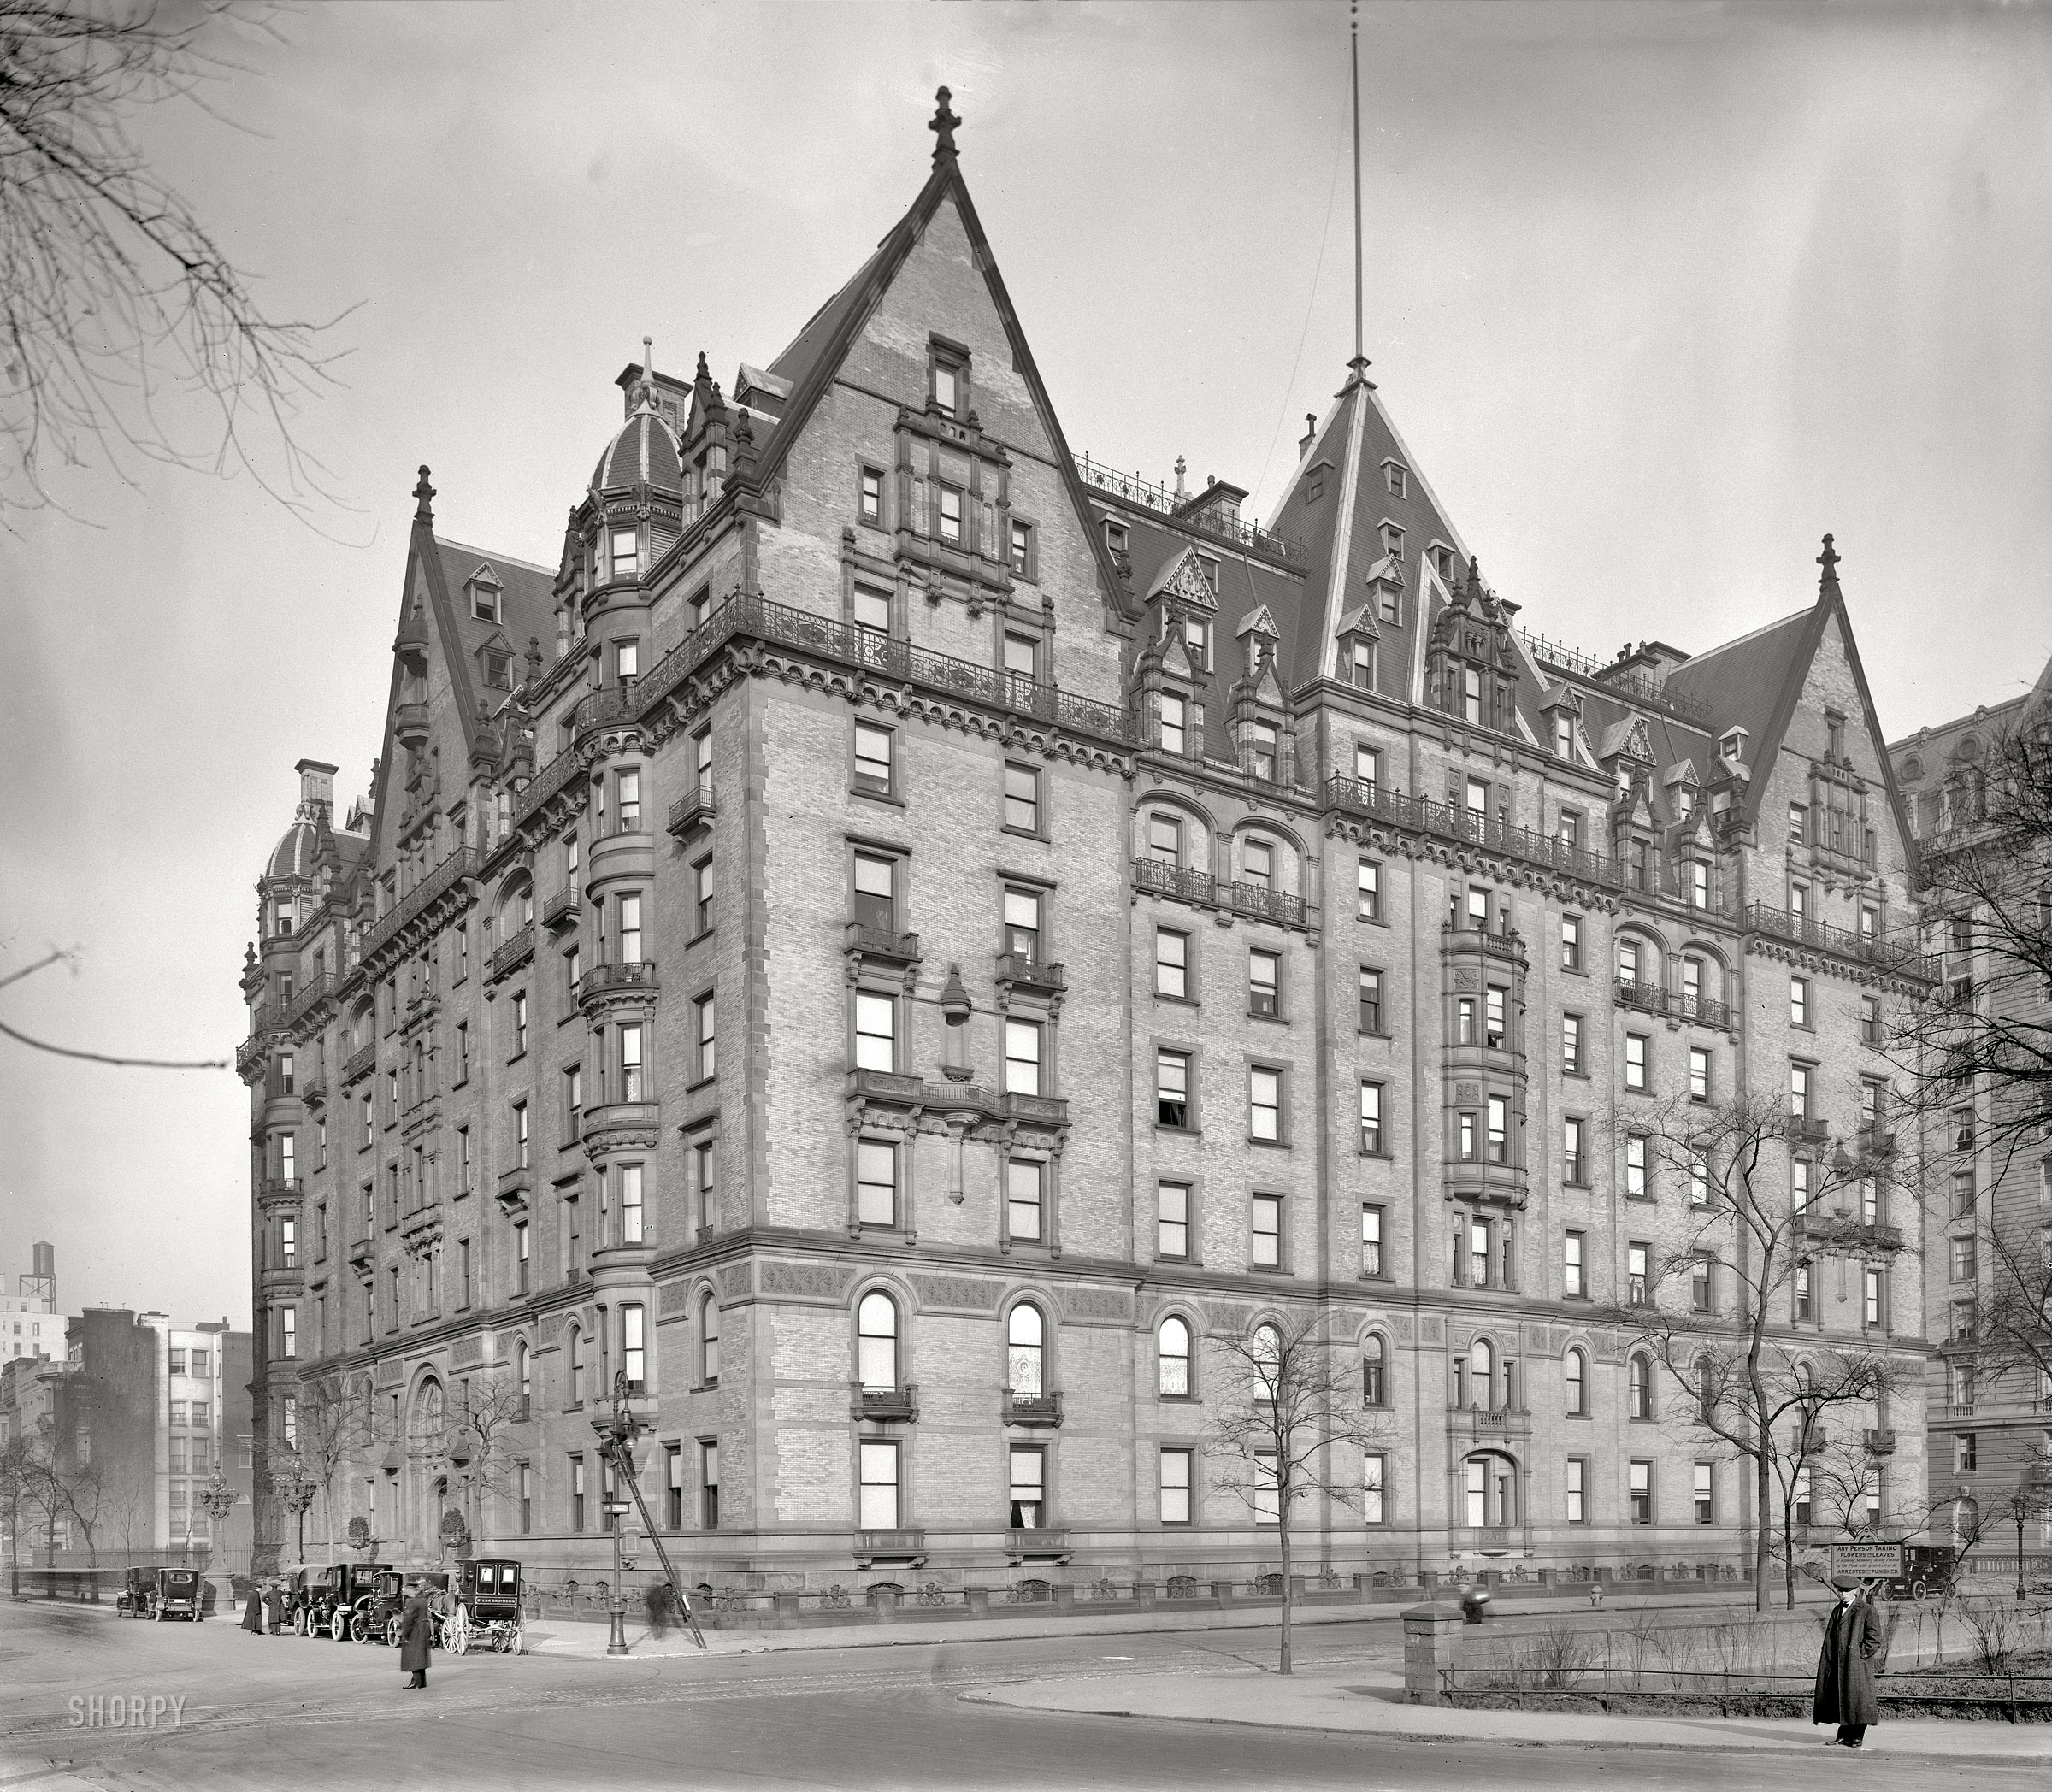 New York circa 1912. "Dakota Apartments, Central Park West and West 72nd Street." 8x10 inch glass negative, Detroit Publishing Company. View full size.